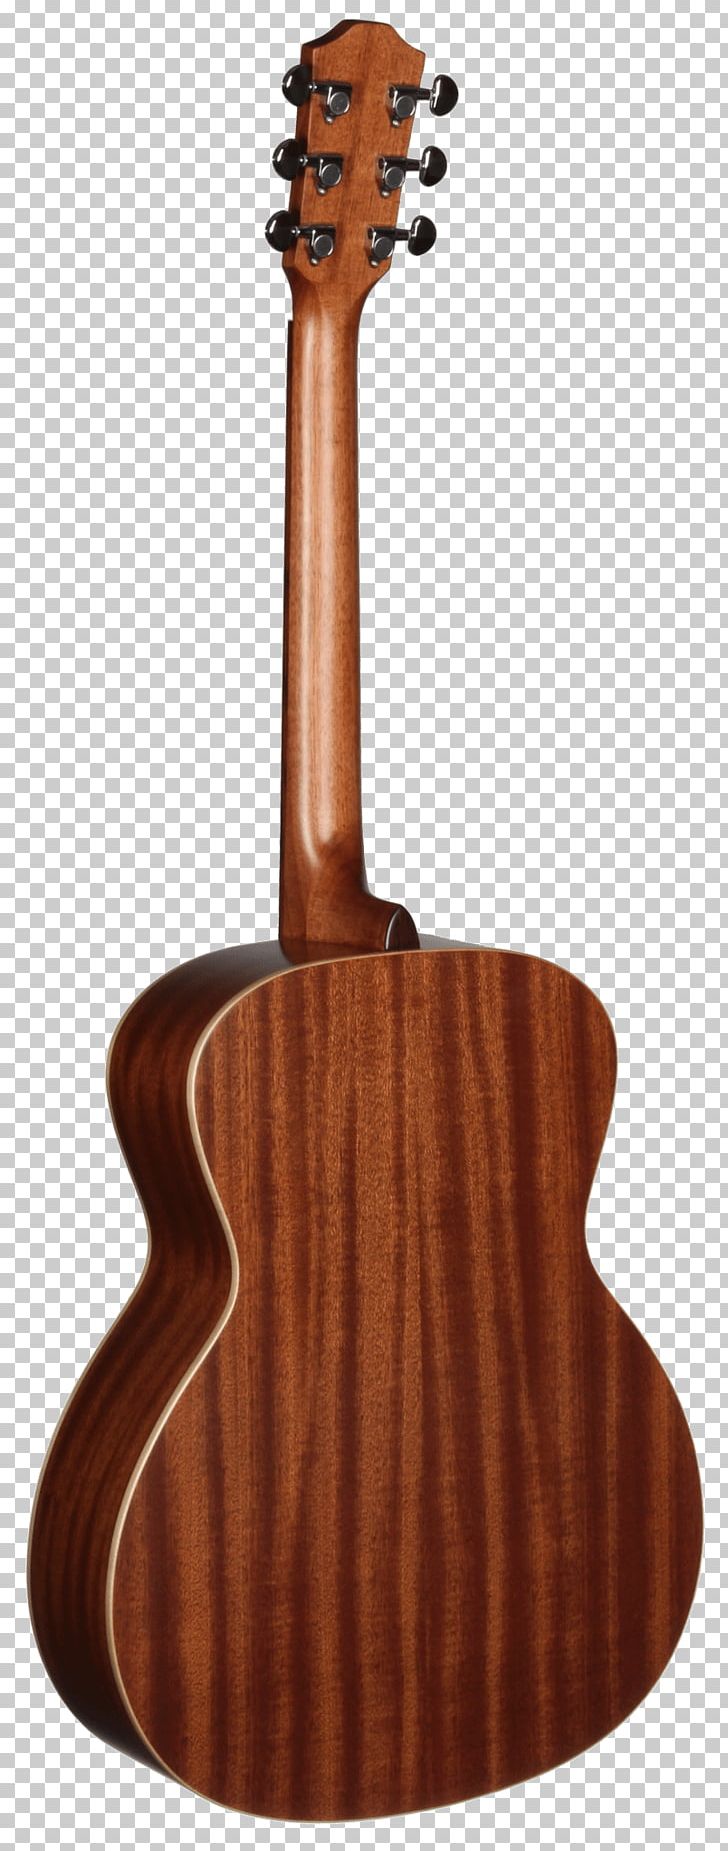 Twelve-string Guitar Acoustic-electric Guitar Steel-string Acoustic Guitar PNG, Clipart, Acoustic Electric Guitar, Classical Guitar, Cutaway, Musical Instruments, Objects Free PNG Download